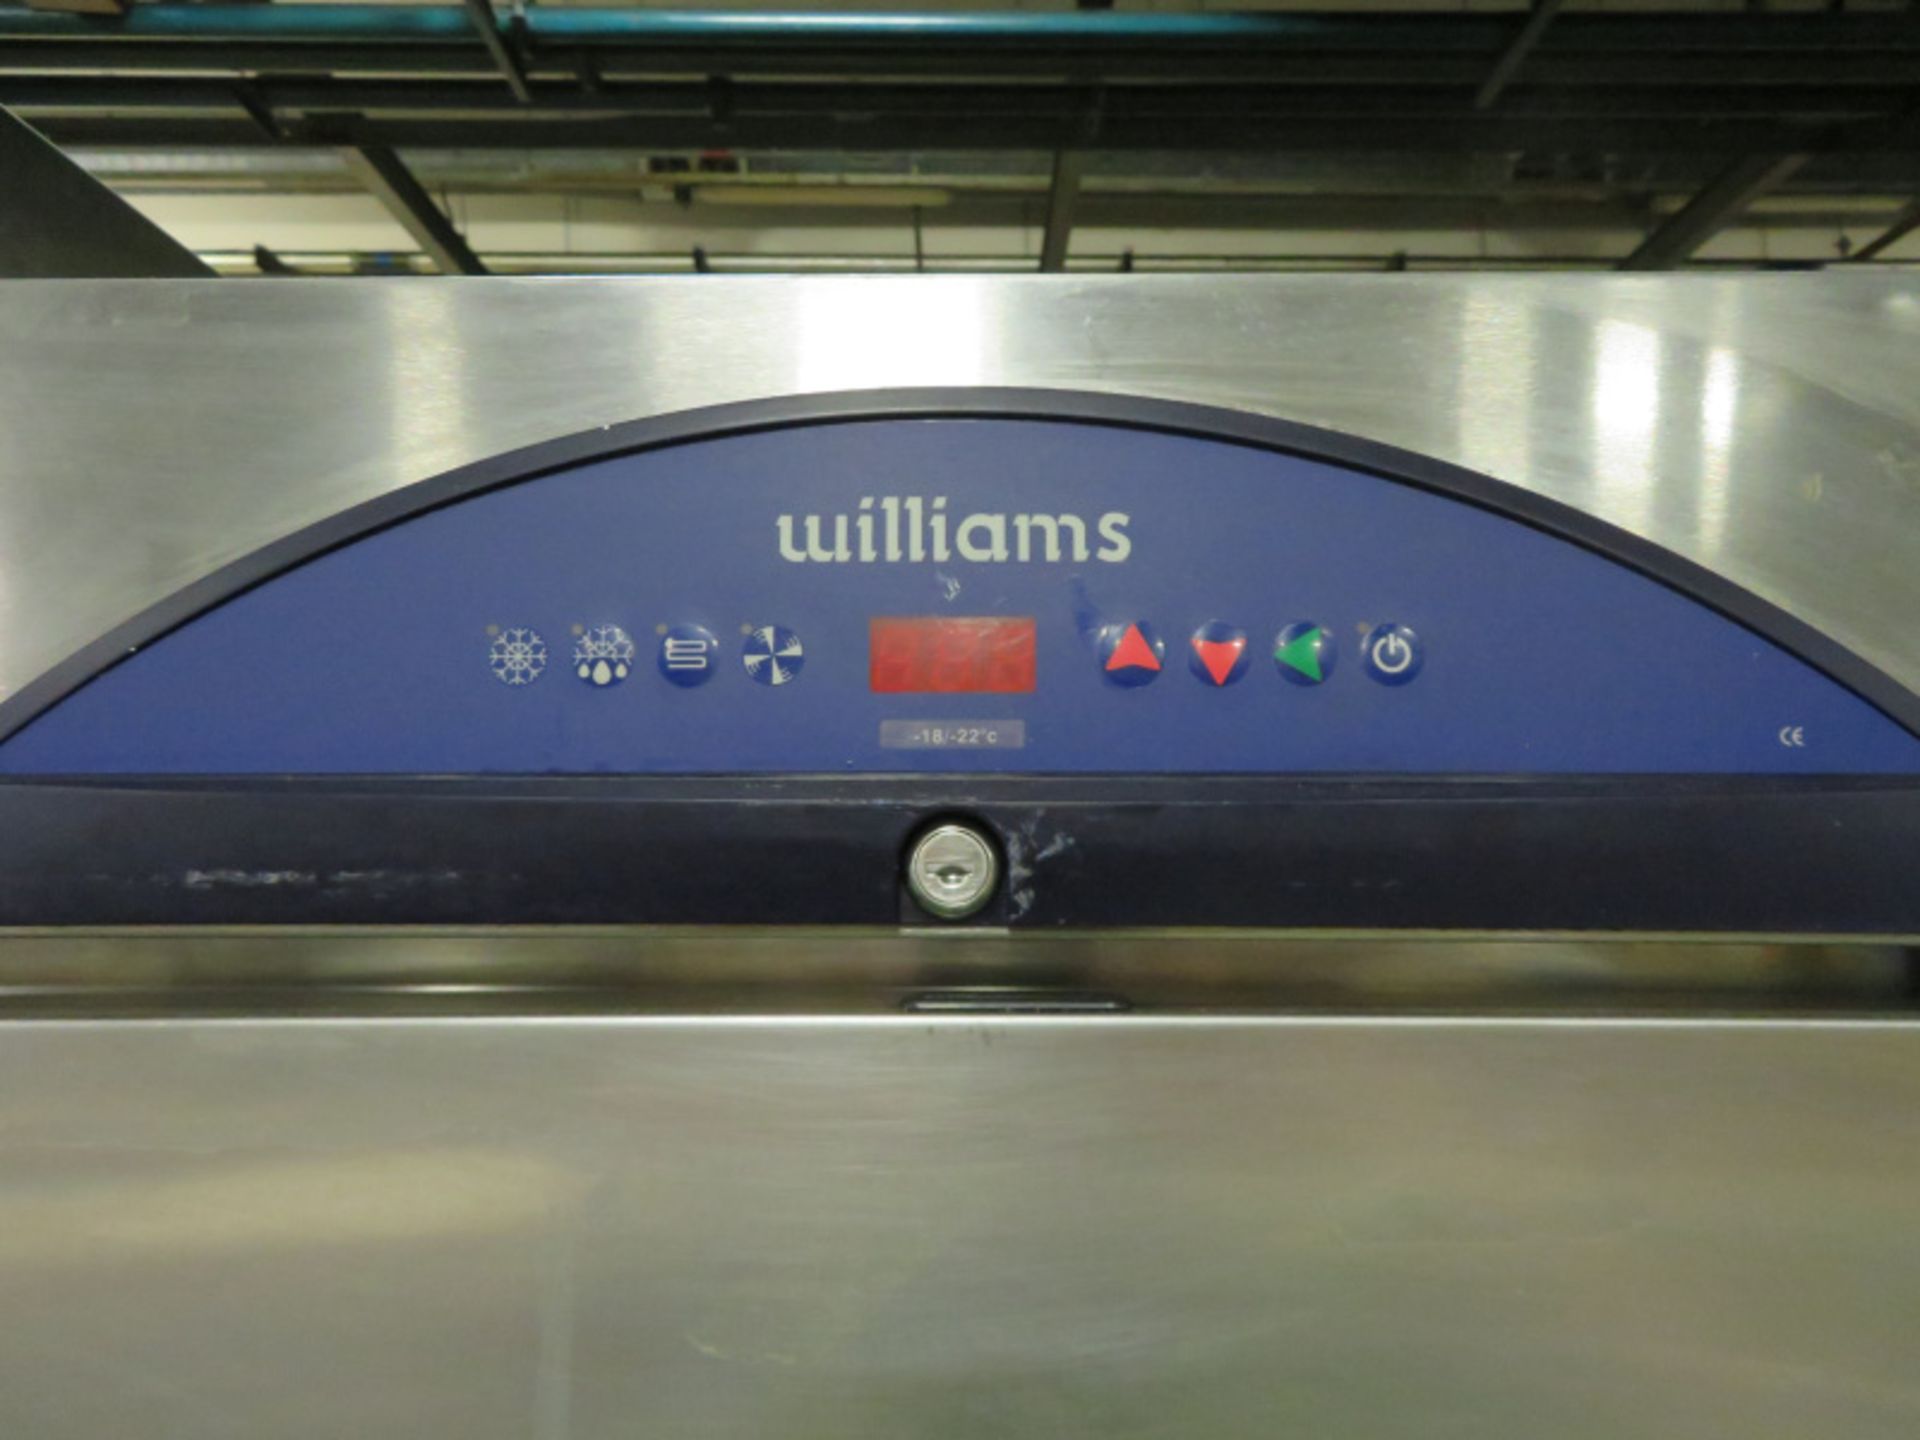 Williams LZ16-WB Upright Freezer - (No Shelves & dents on door) - 740mm x 710mm x 1900mm - Image 2 of 6